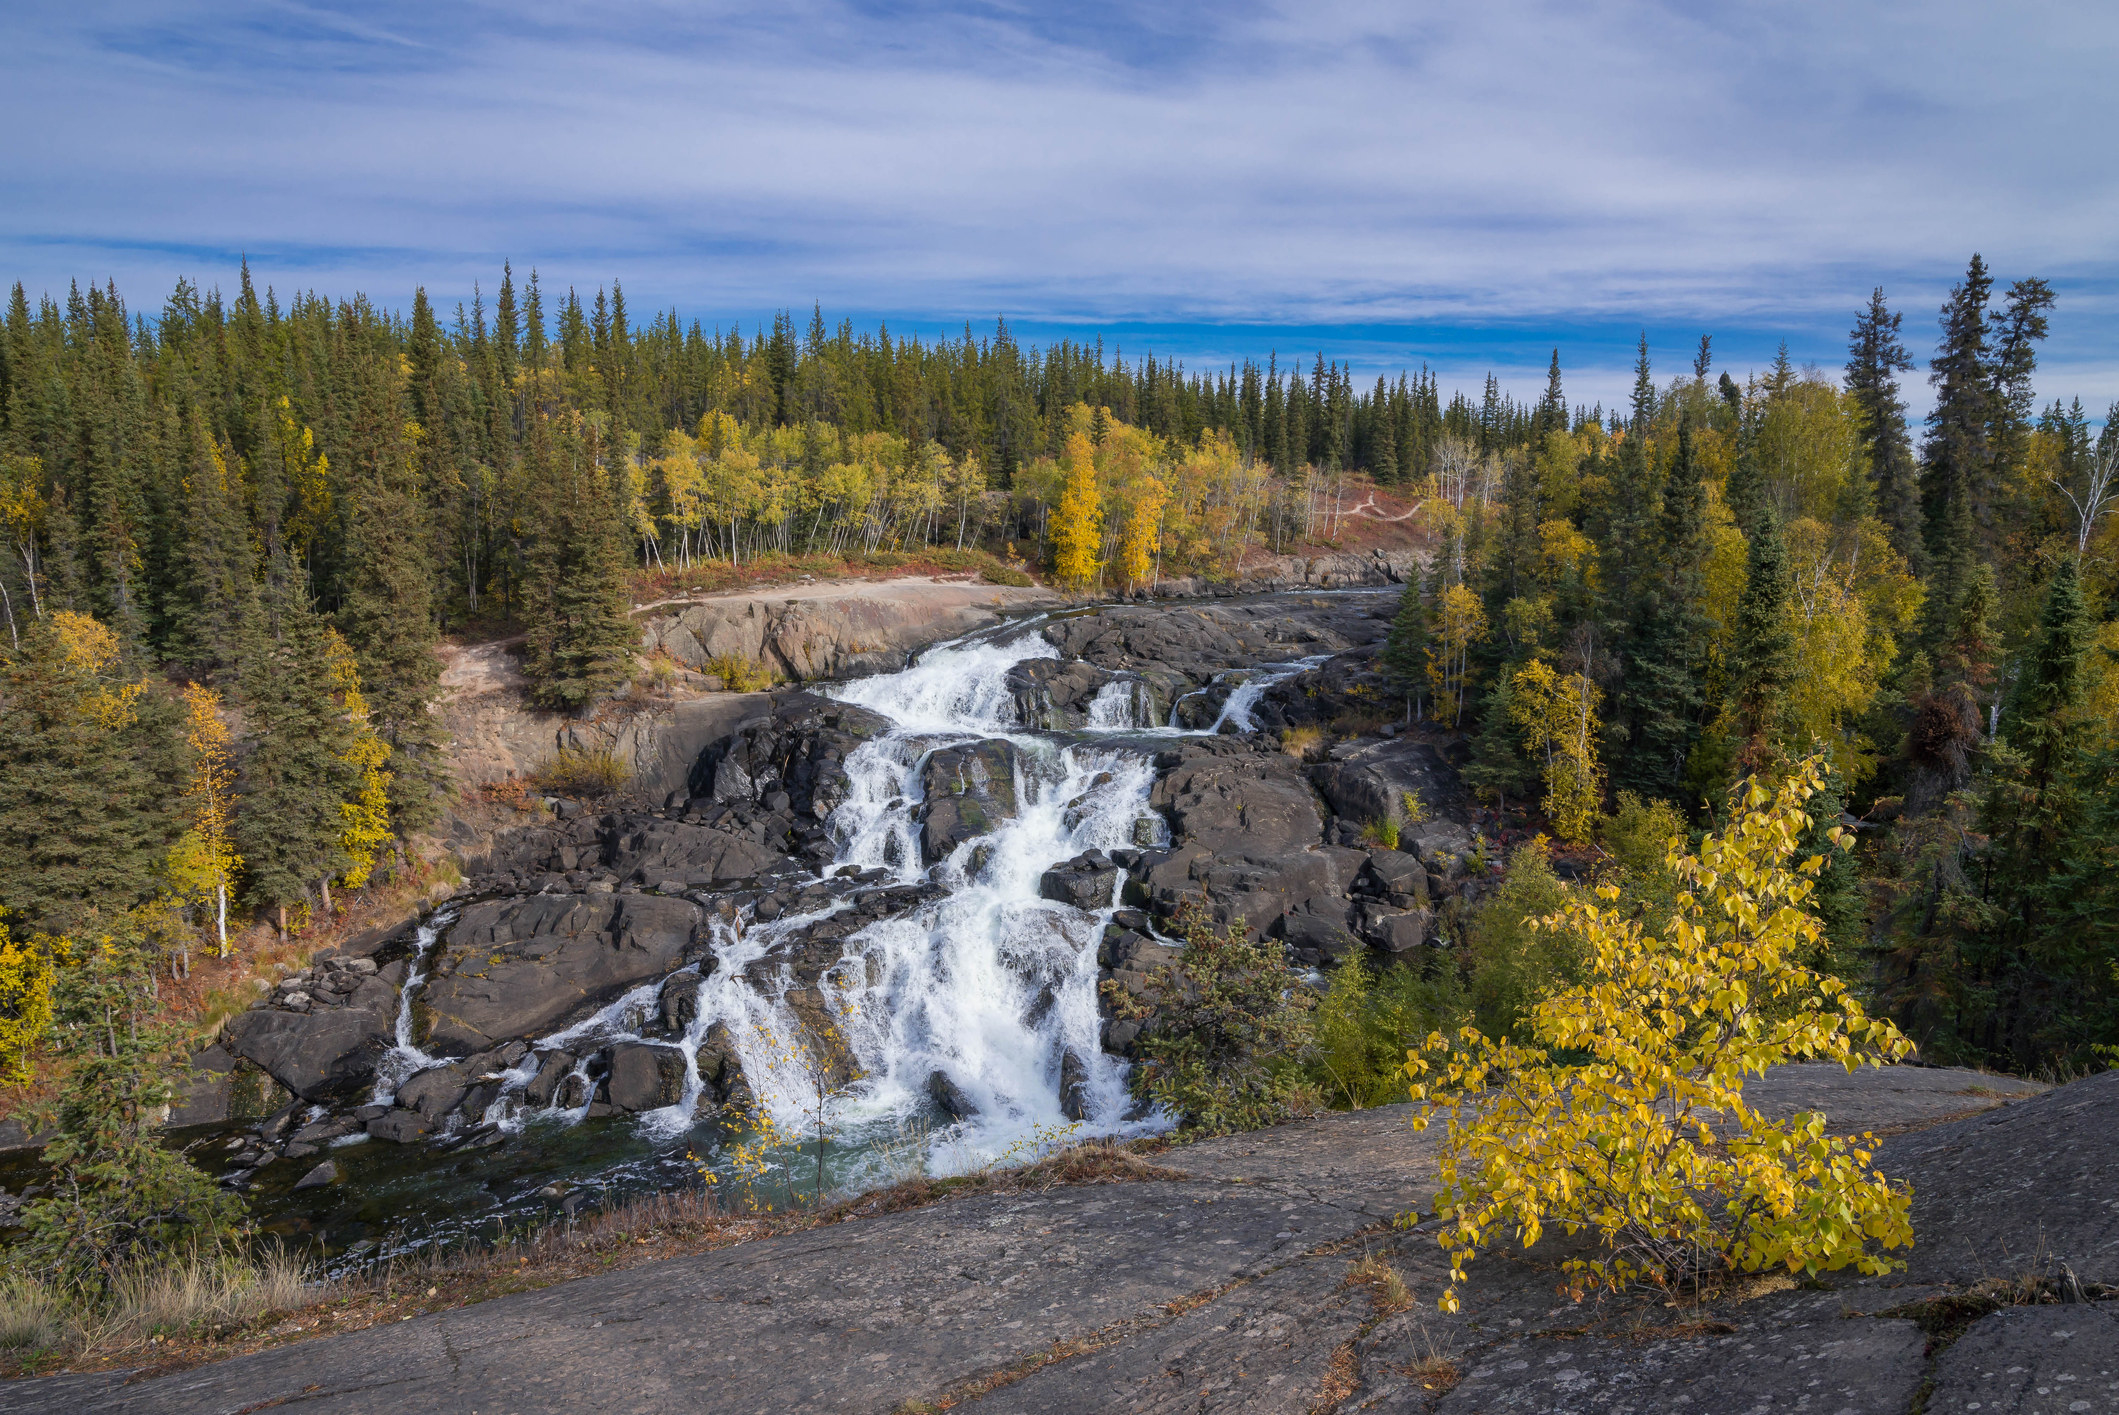 Cameron Falls just outside of Yellowknife, Northwest Territories of Canada in the autumn afternoon